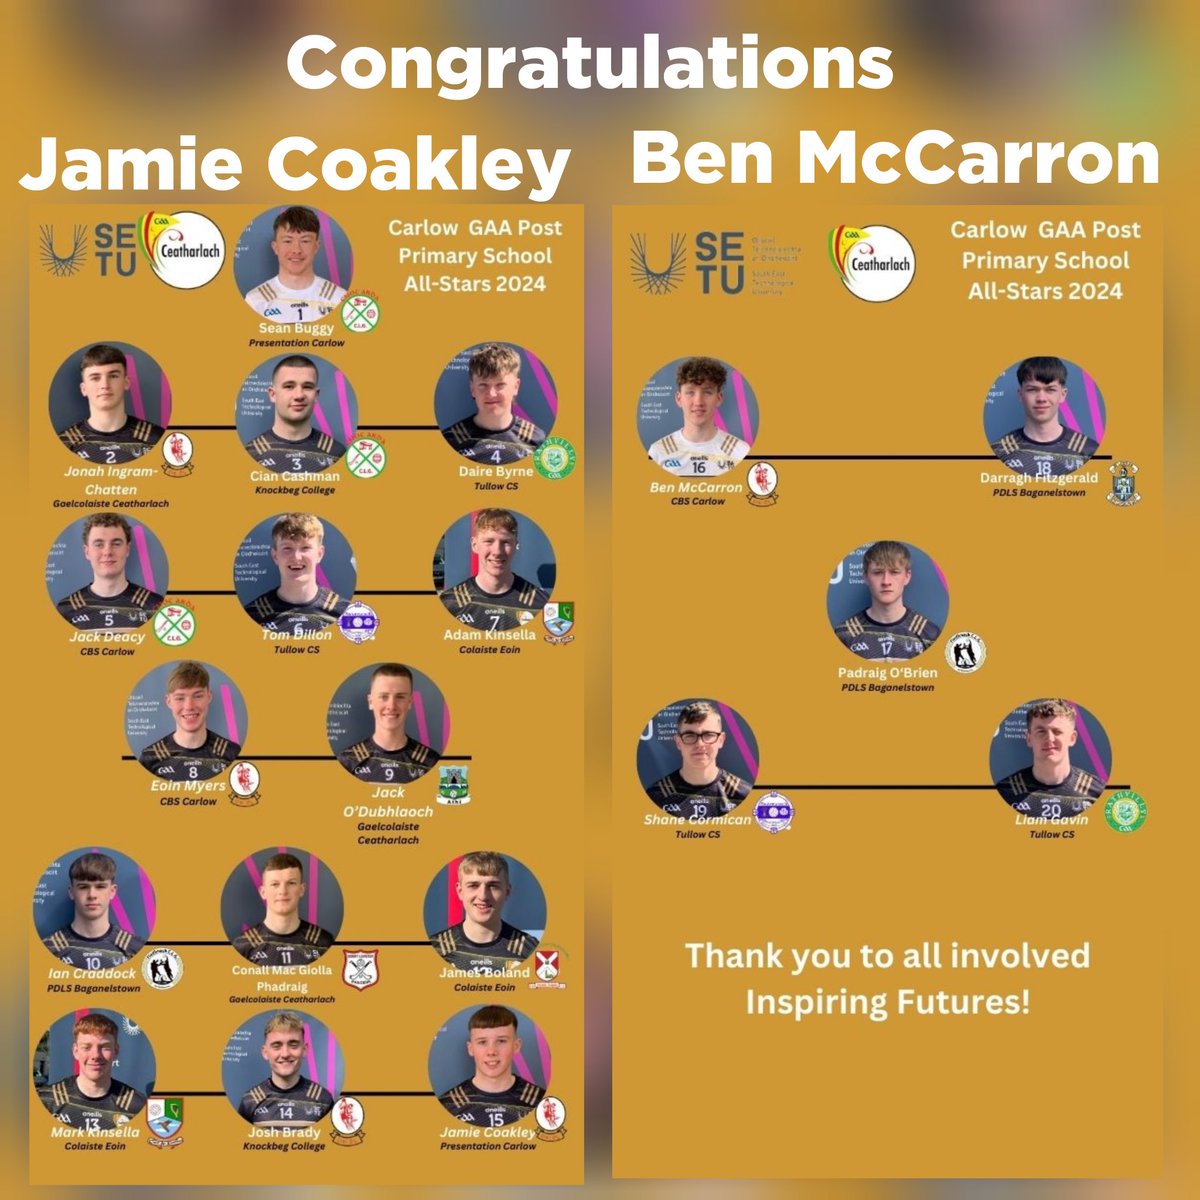 Hanover Harps would like to congratulate Jamie Coakley from our Youths and Ben McCarron from our First team who were selected as Post Primary All Stars with the Carlow GAA. A fantastic achievement well done from all in Hanover. @Pres_Carlow @cbscarlow